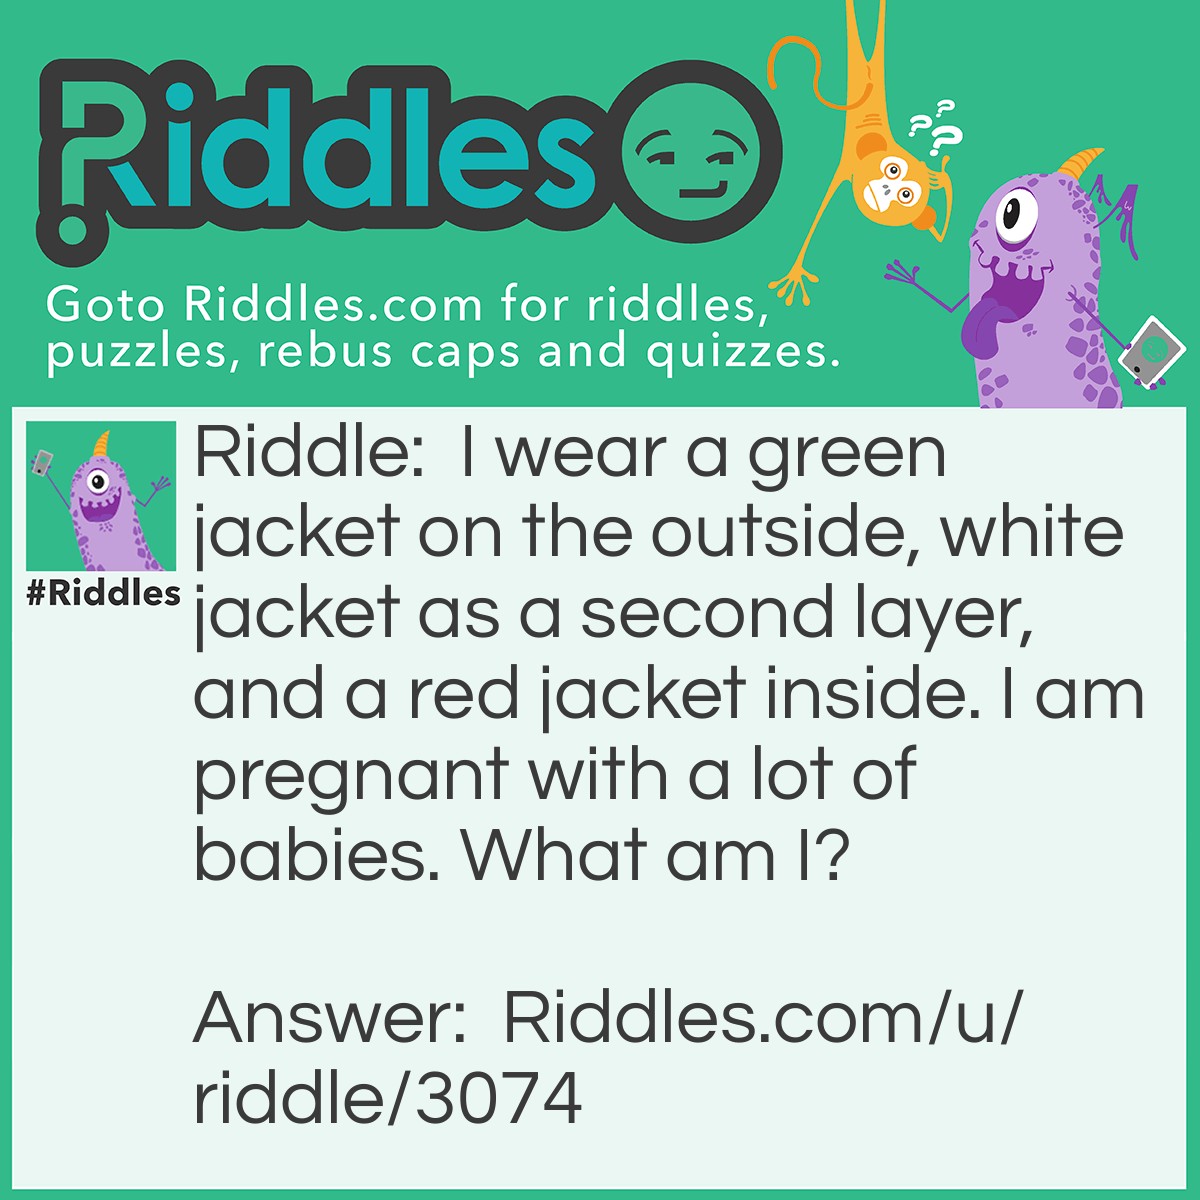 Riddle: I wear a green jacket on the outside, white jacket as a second layer, and a red jacket inside. I am pregnant with a lot of babies. What am I? Answer: A Watermelon.